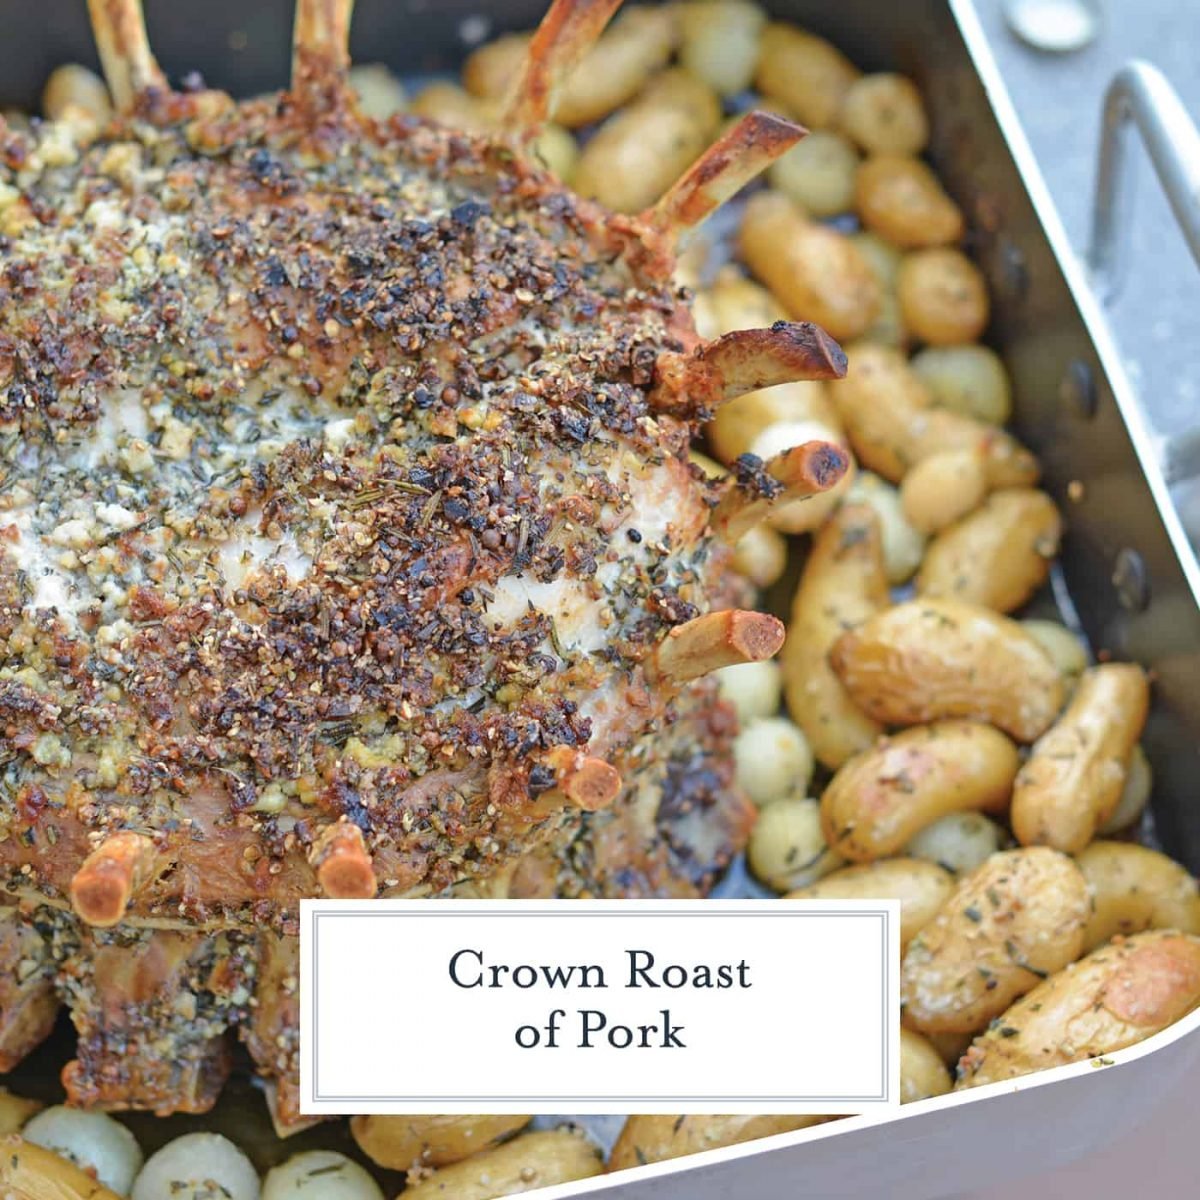 Crown Pork Roast is the perfect special occasion or holiday meal to serve for a crowd. Tasty and impressive presentation make this a winning pork recipe! #crownroastofpork #porkcrownroast www.savoryexperiments.com